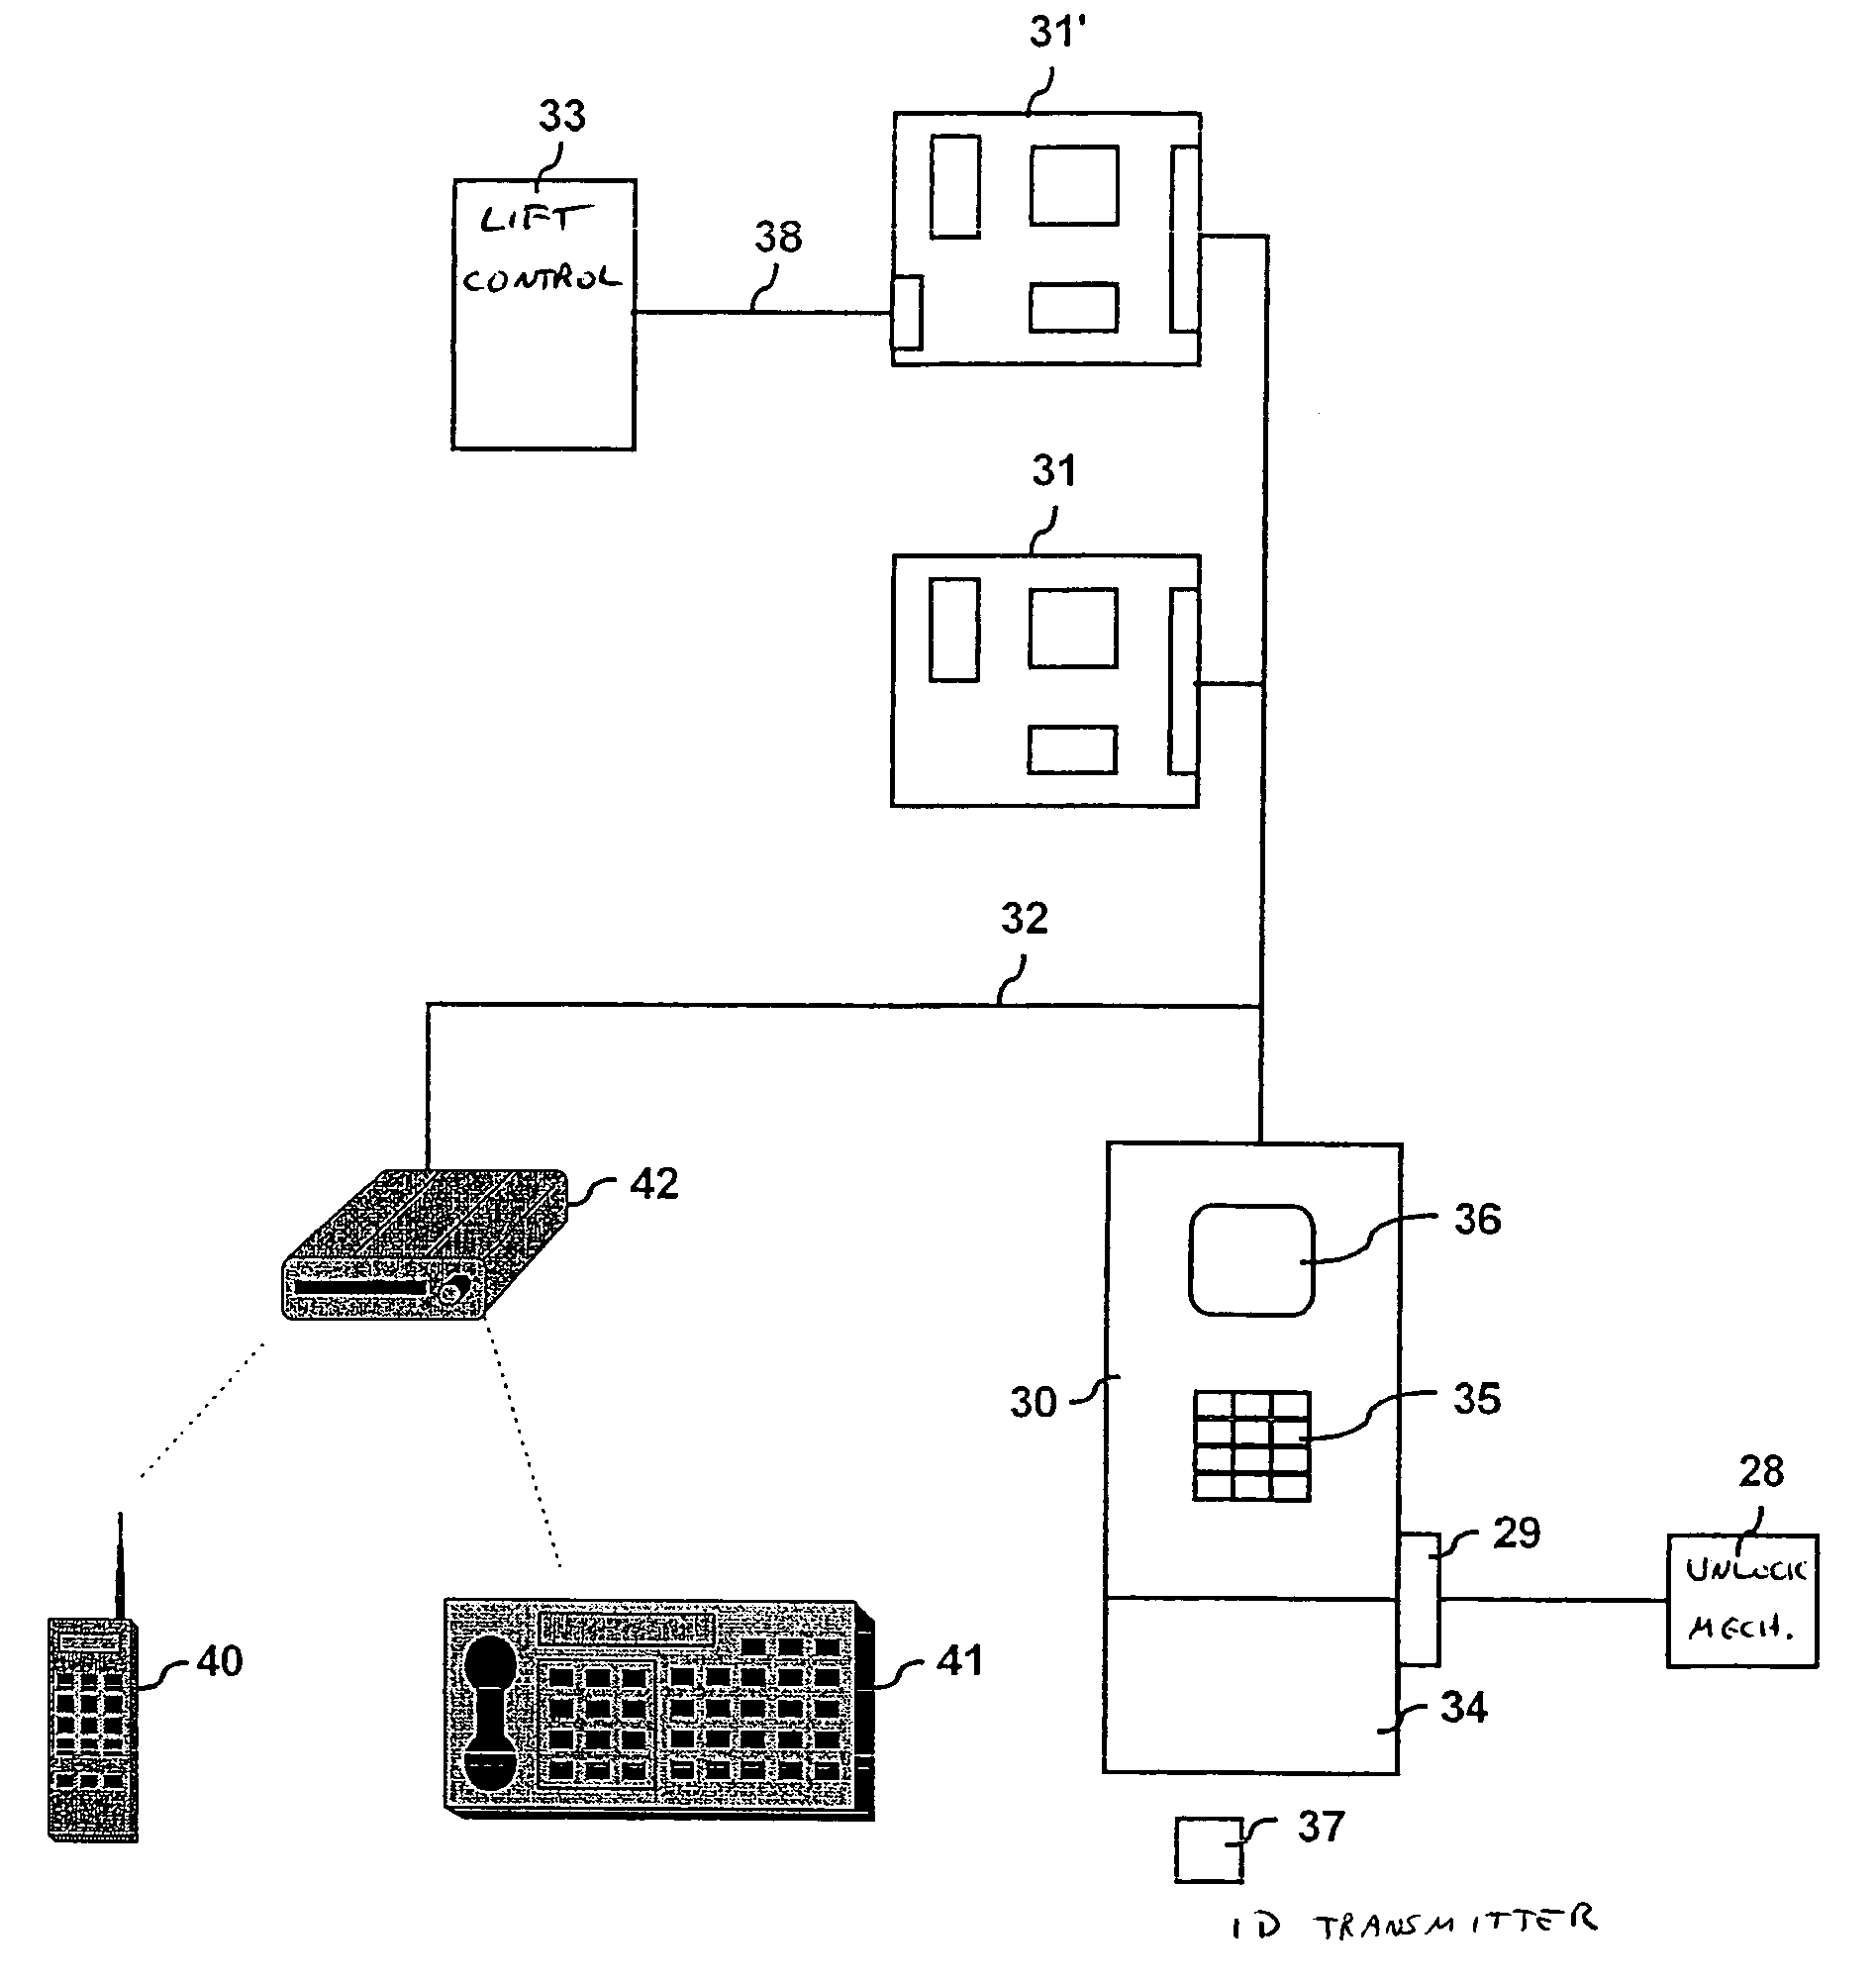 System for transportation or access control of persons or goods, and method, device and computer program for maintenance of the system, and method for retrofitting a building with the system